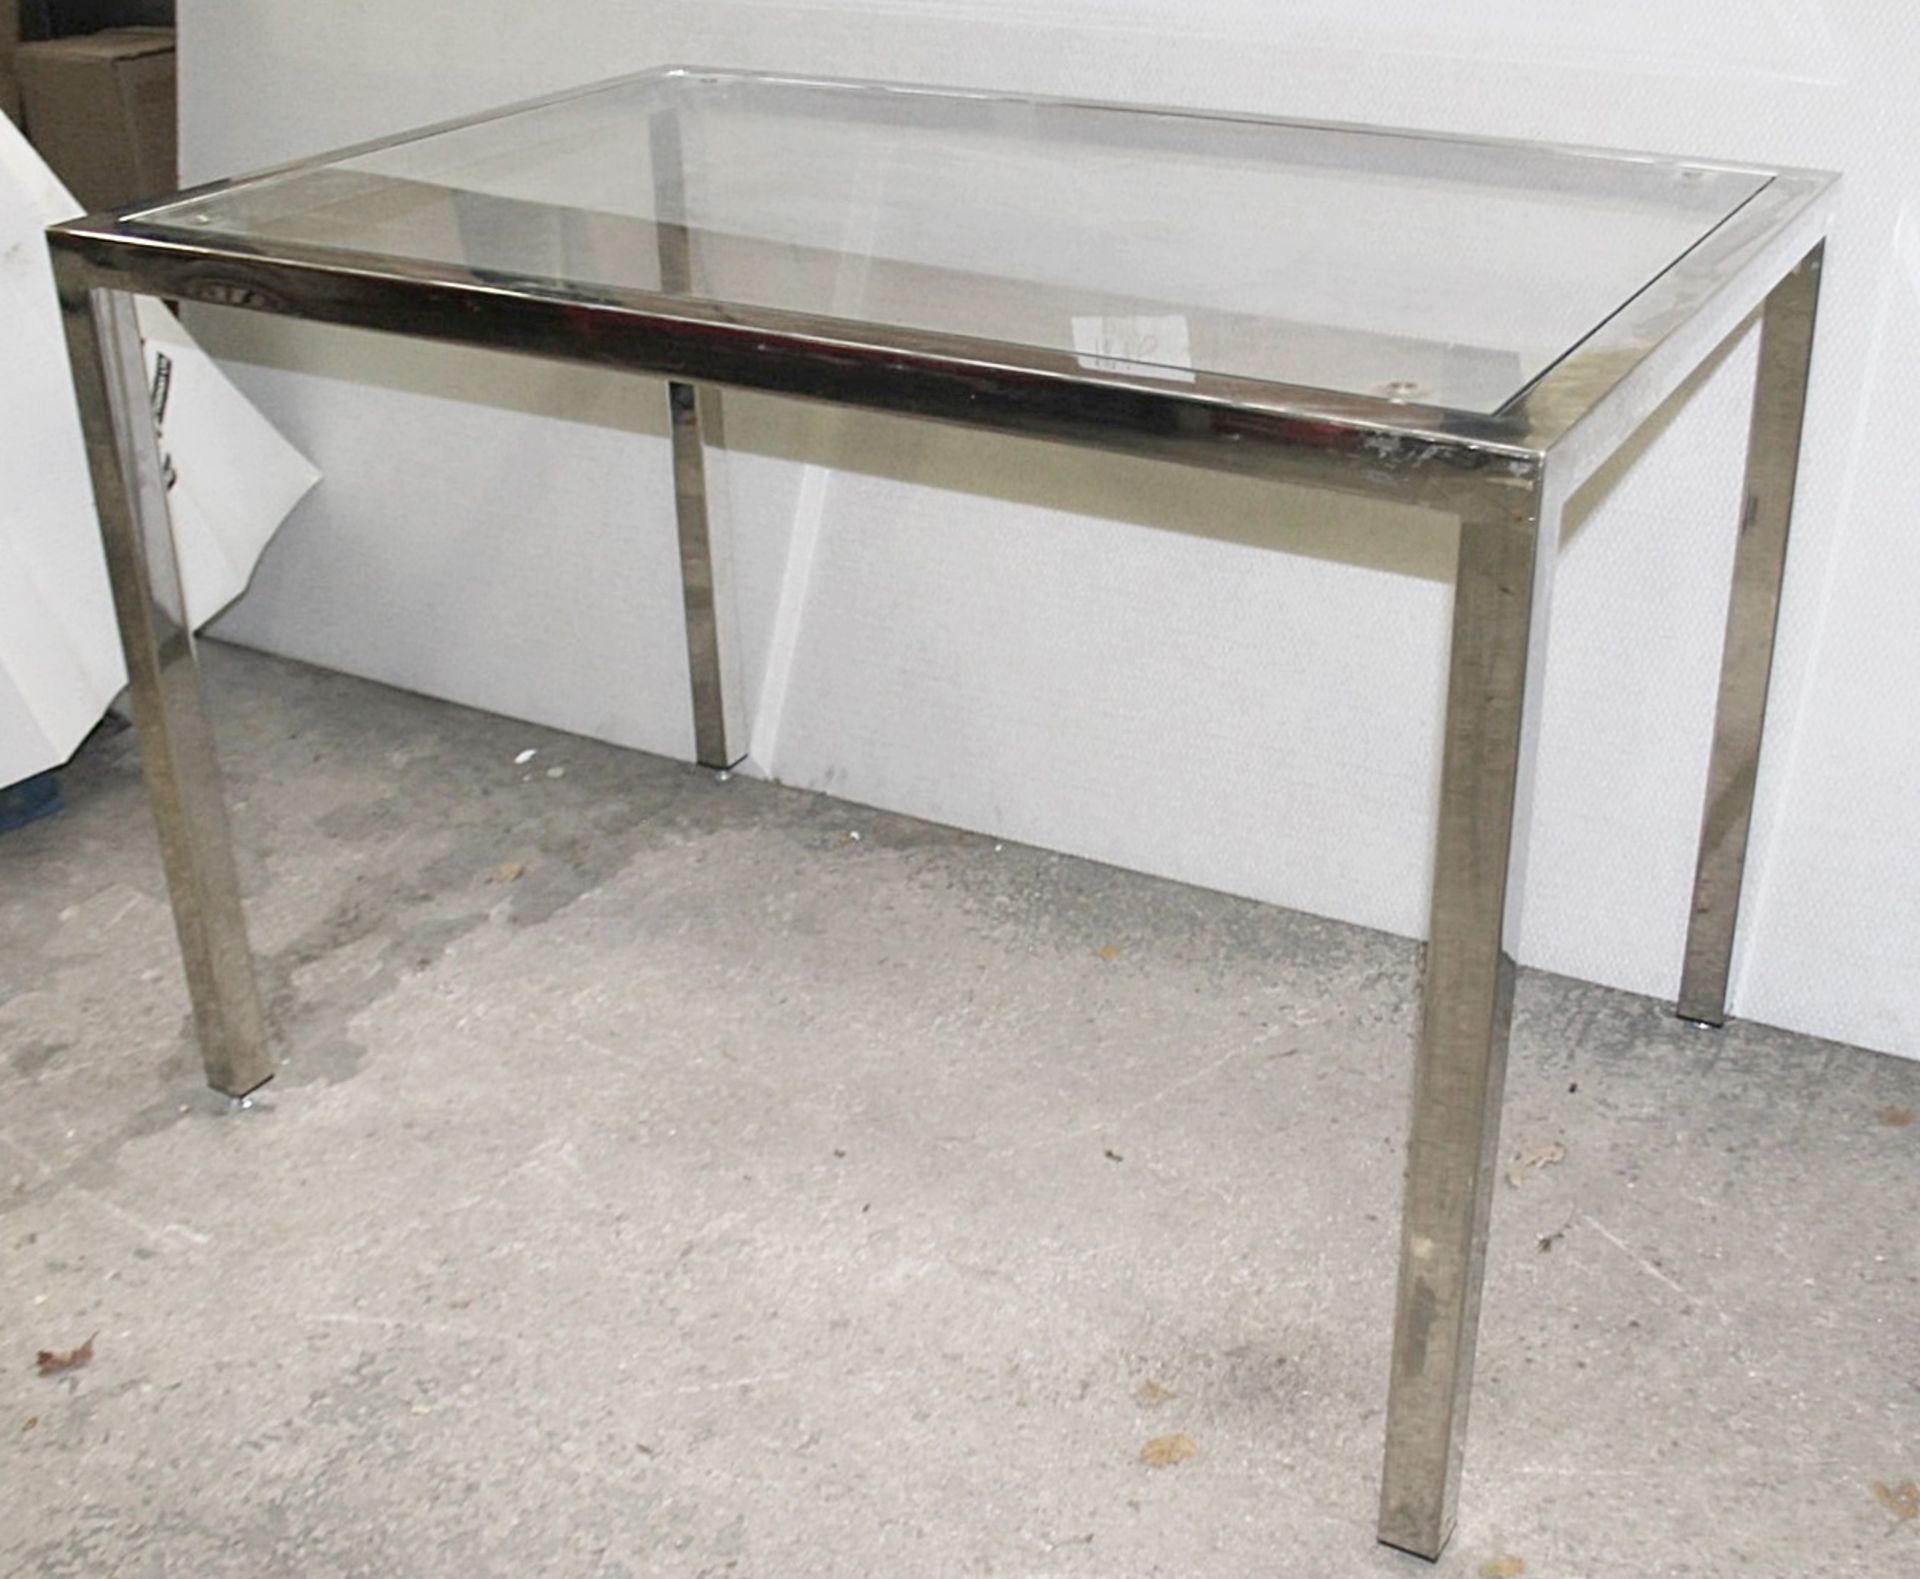 1 x Large Display Table In Glass And Chrome - Dimensions: H91 x W135 x D90cm - Ex-Showroom Piece - - Image 6 of 6